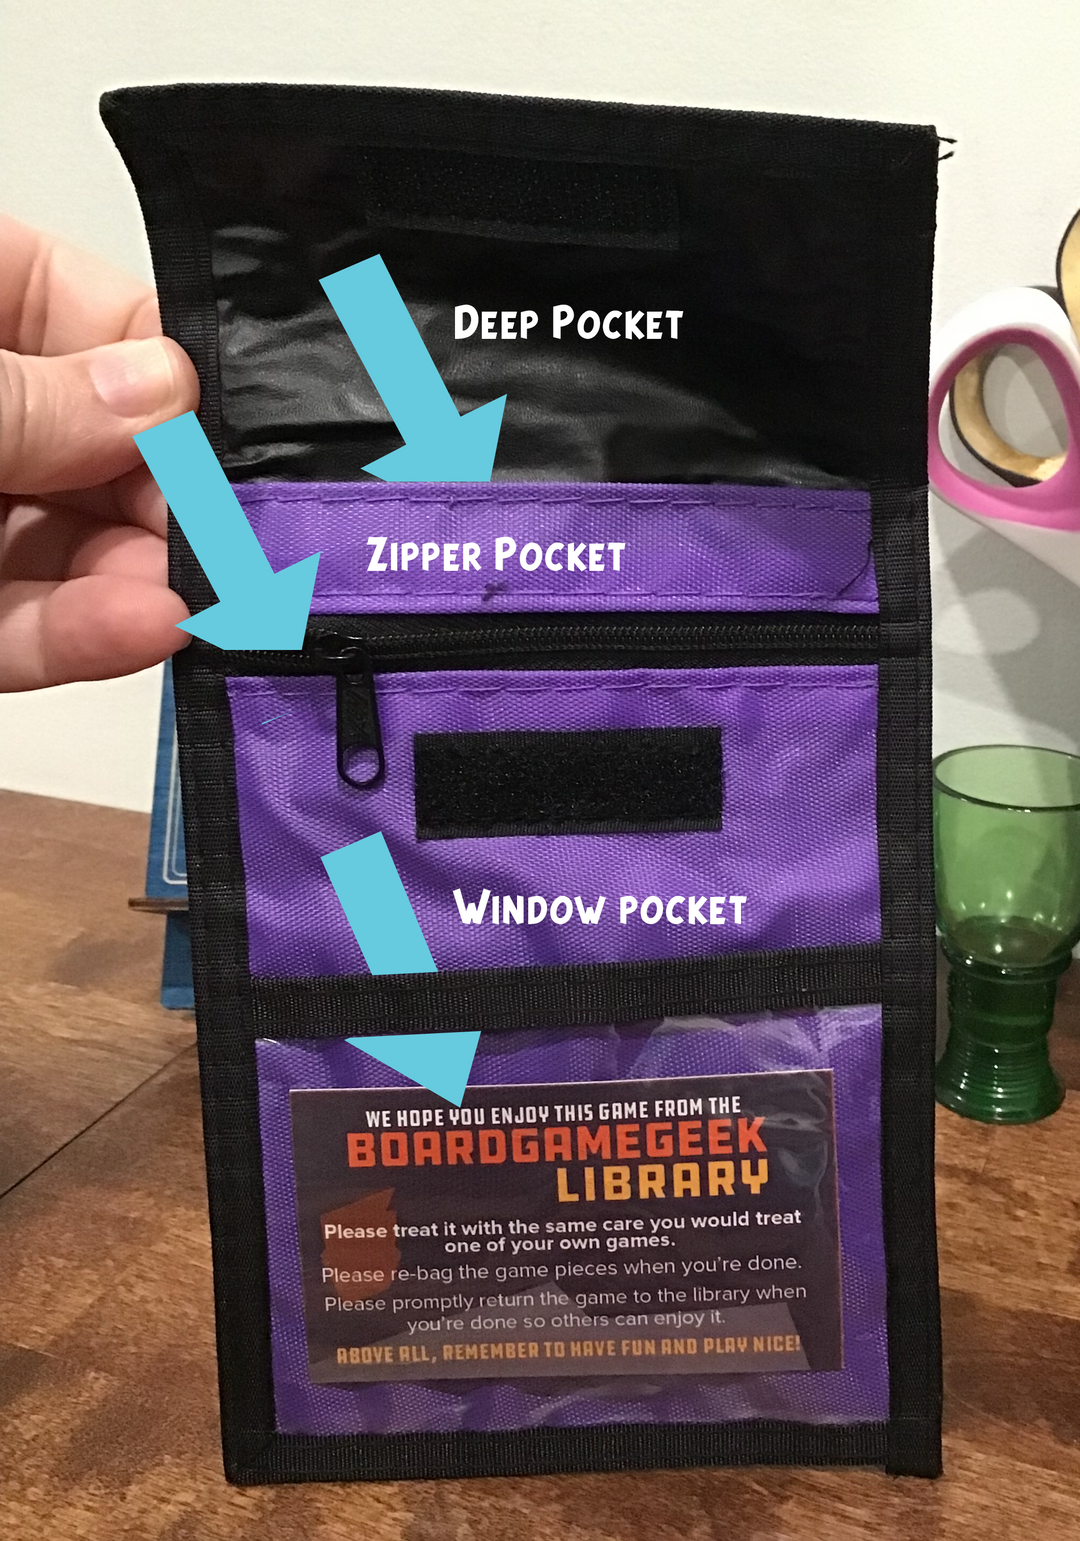 An annotated photo of a purple neck wallet, with three labeled sections titled "Deep Pocket", "Zipper Pocket", and "Window Pocket" and a blue arrow pointing to each.